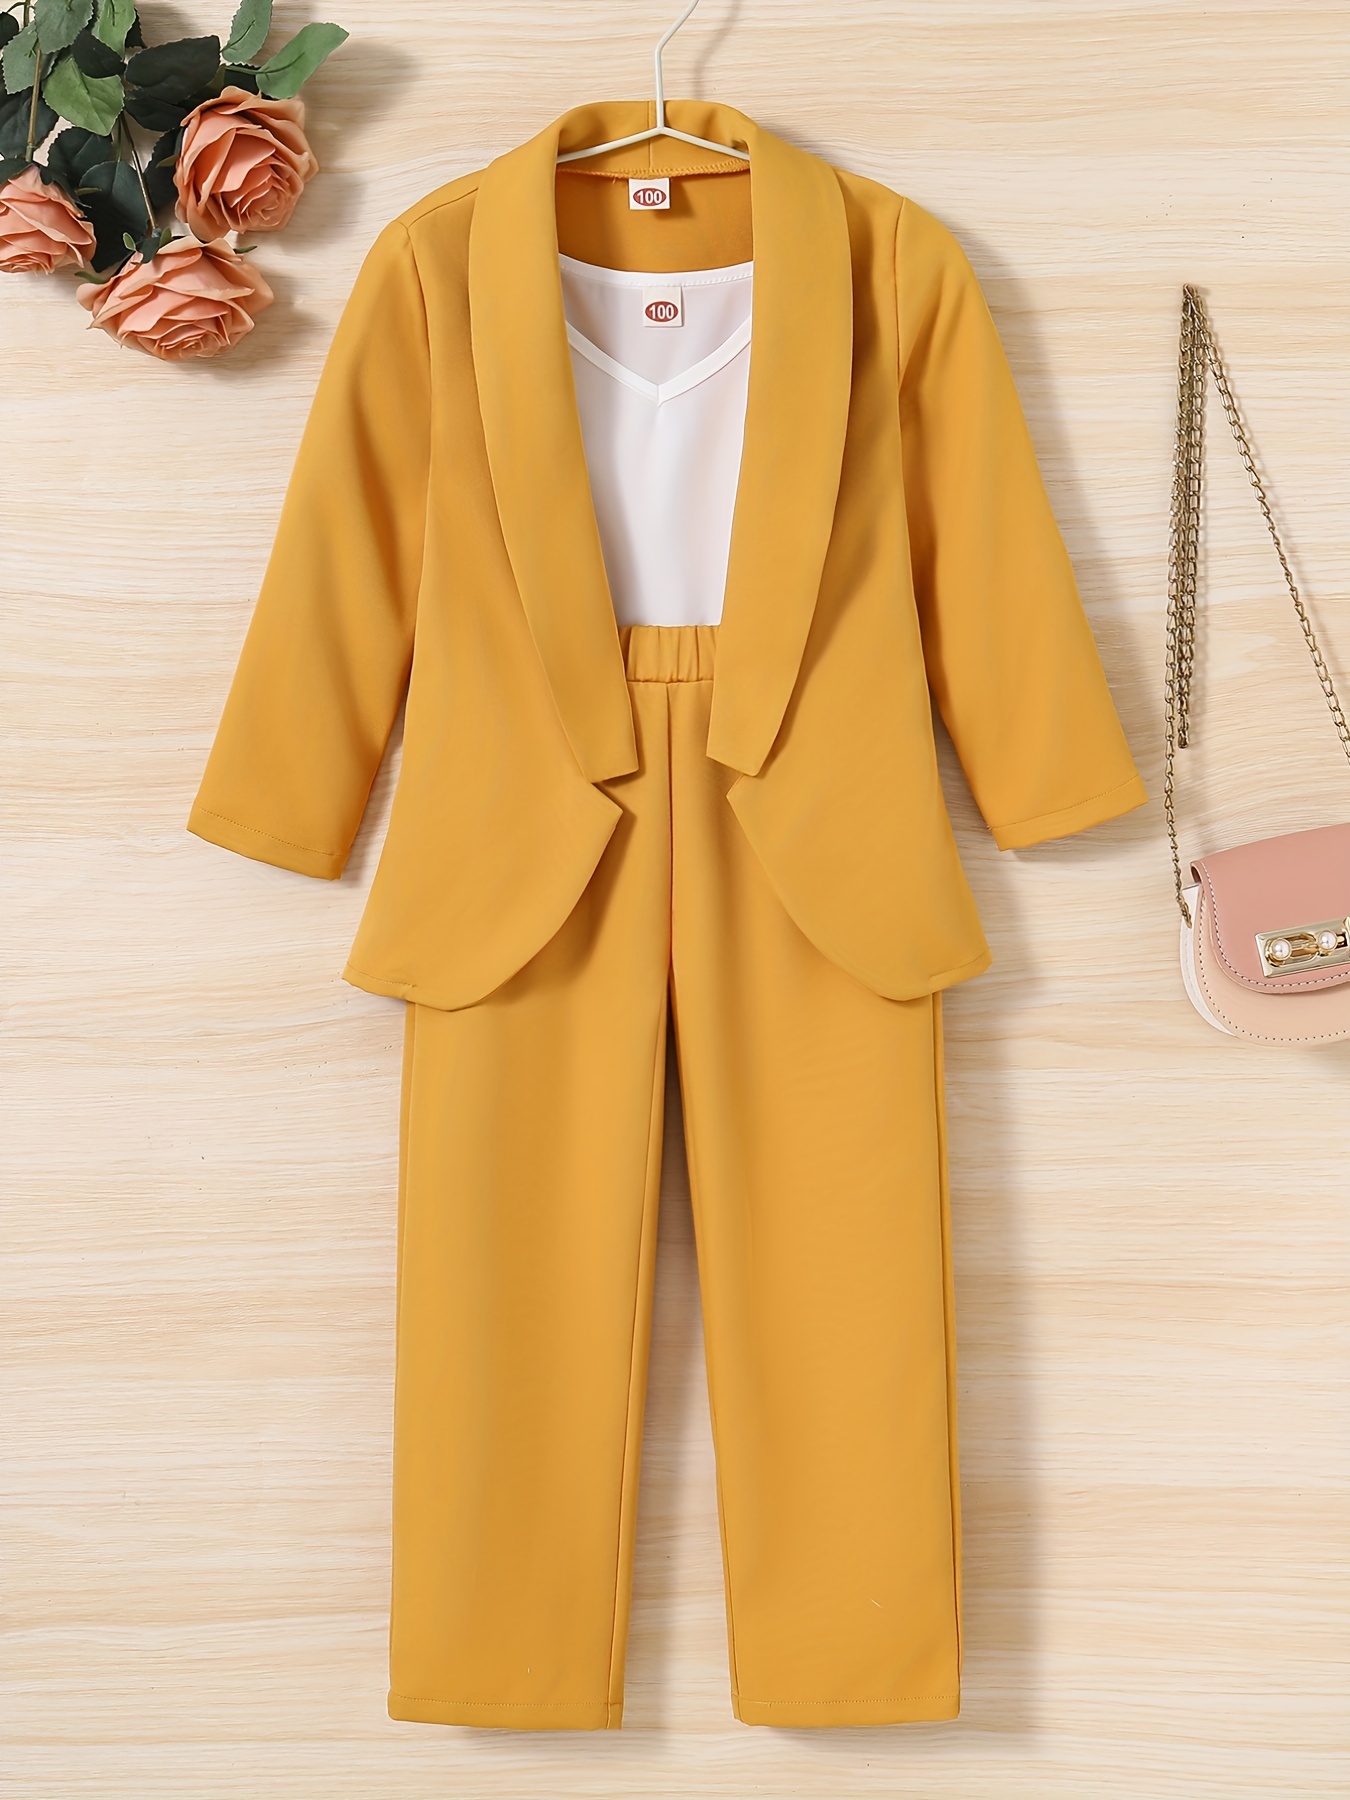 Kids Girls Yellow Blazer Suits 2021 New Spring Coat Pants 2 pieces Clothes  Set 8 10 12 years - AliExpress